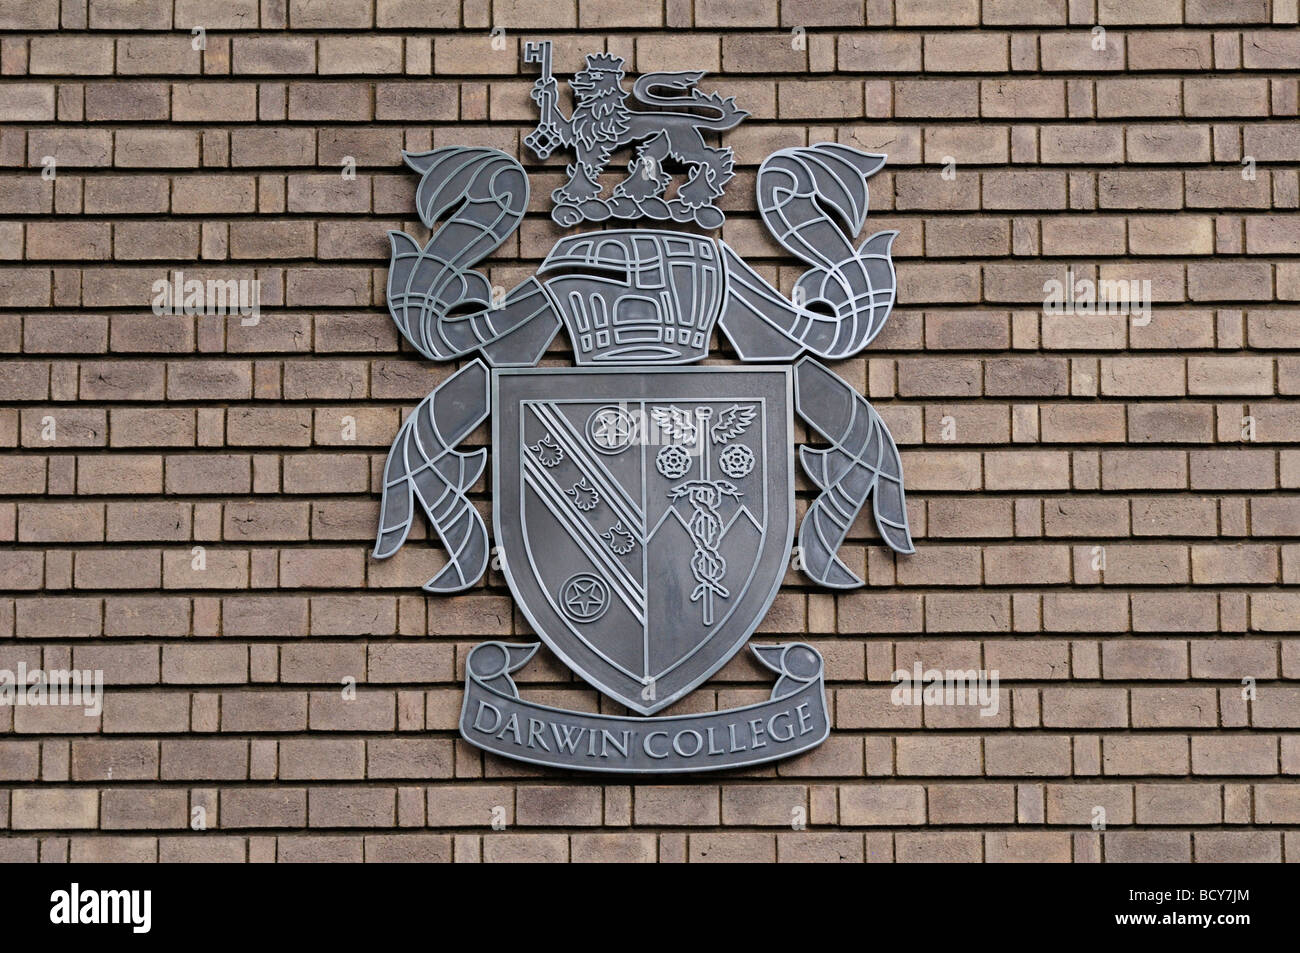 Darwin college hi-res stock photography and images - Alamy